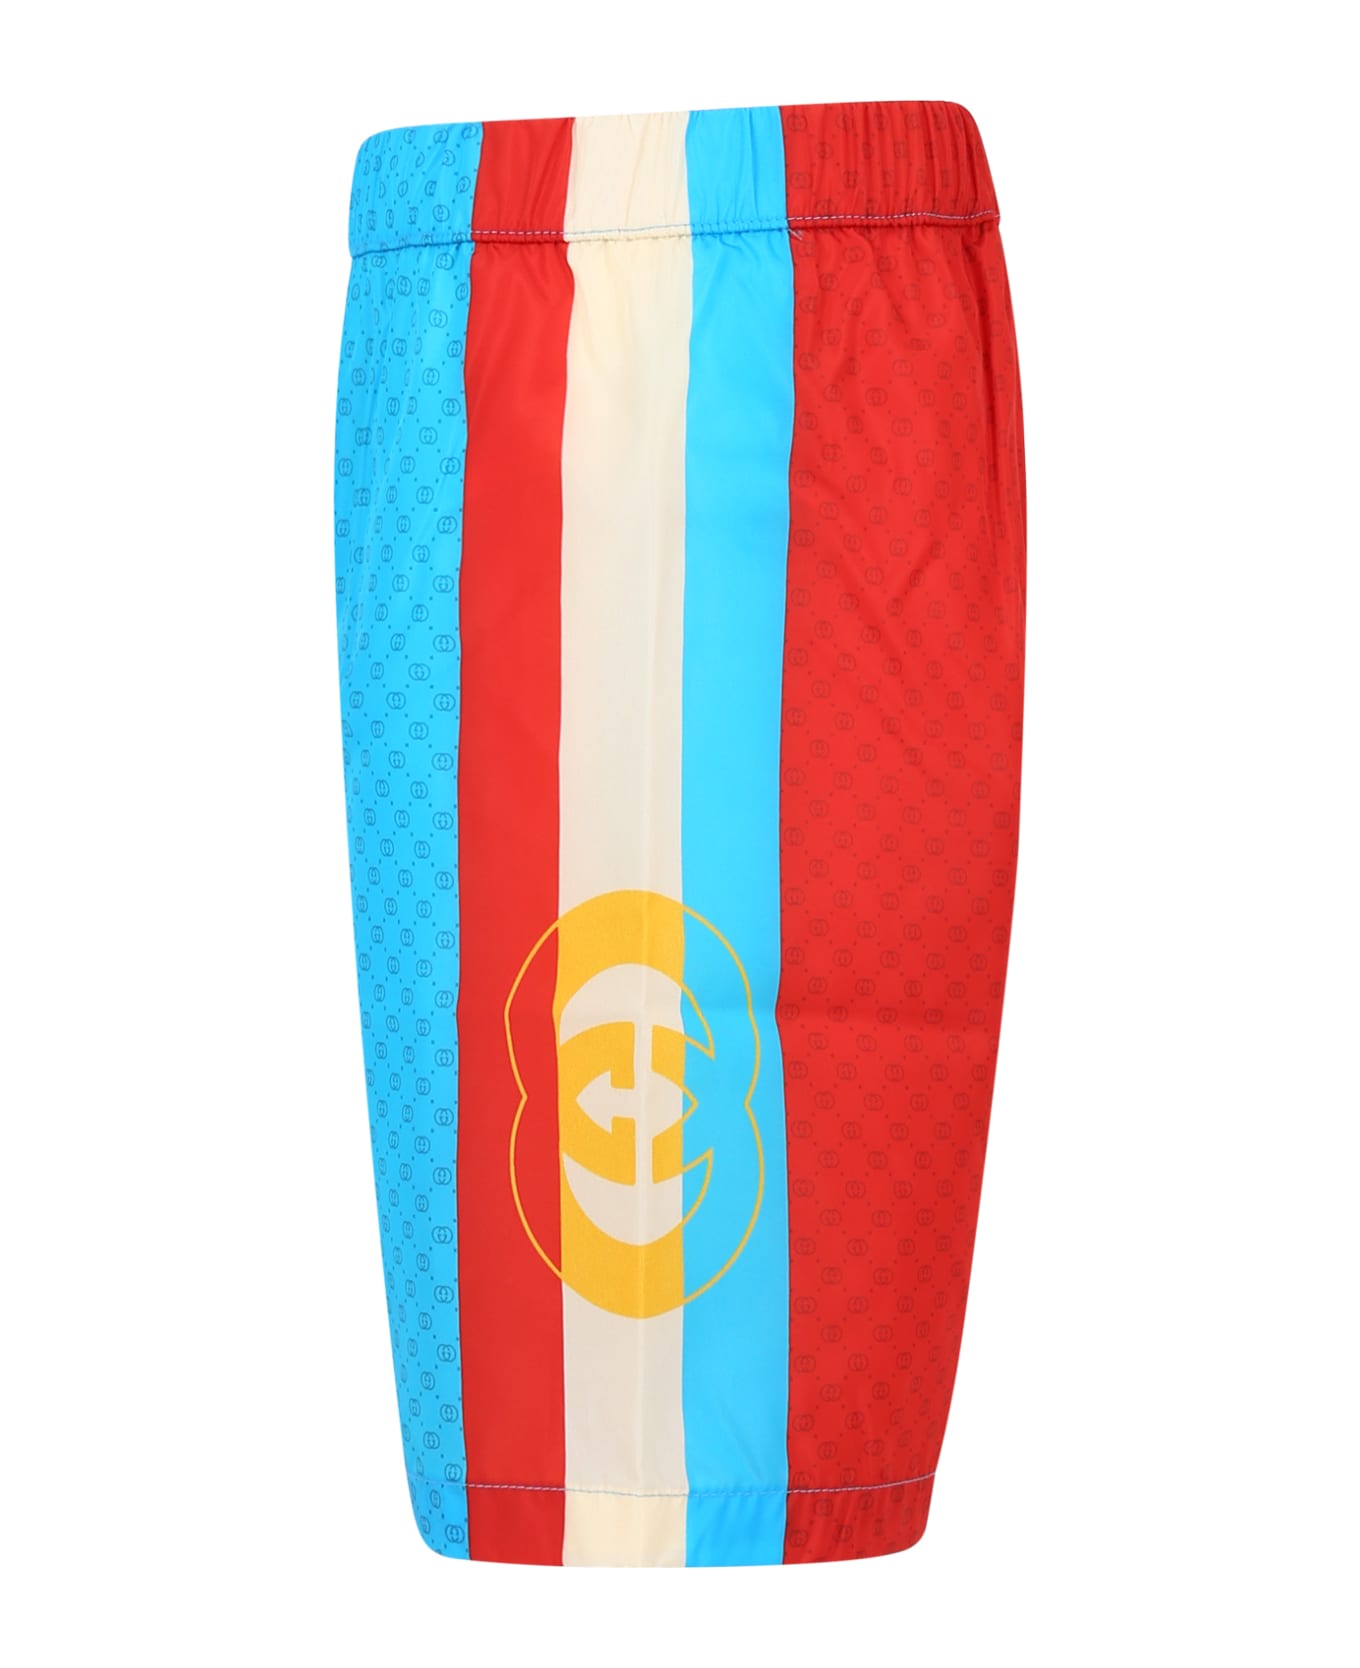 Gucci Multicolor Beach Shorts For Boy With All-over Logo Gg - Light Blue 水着